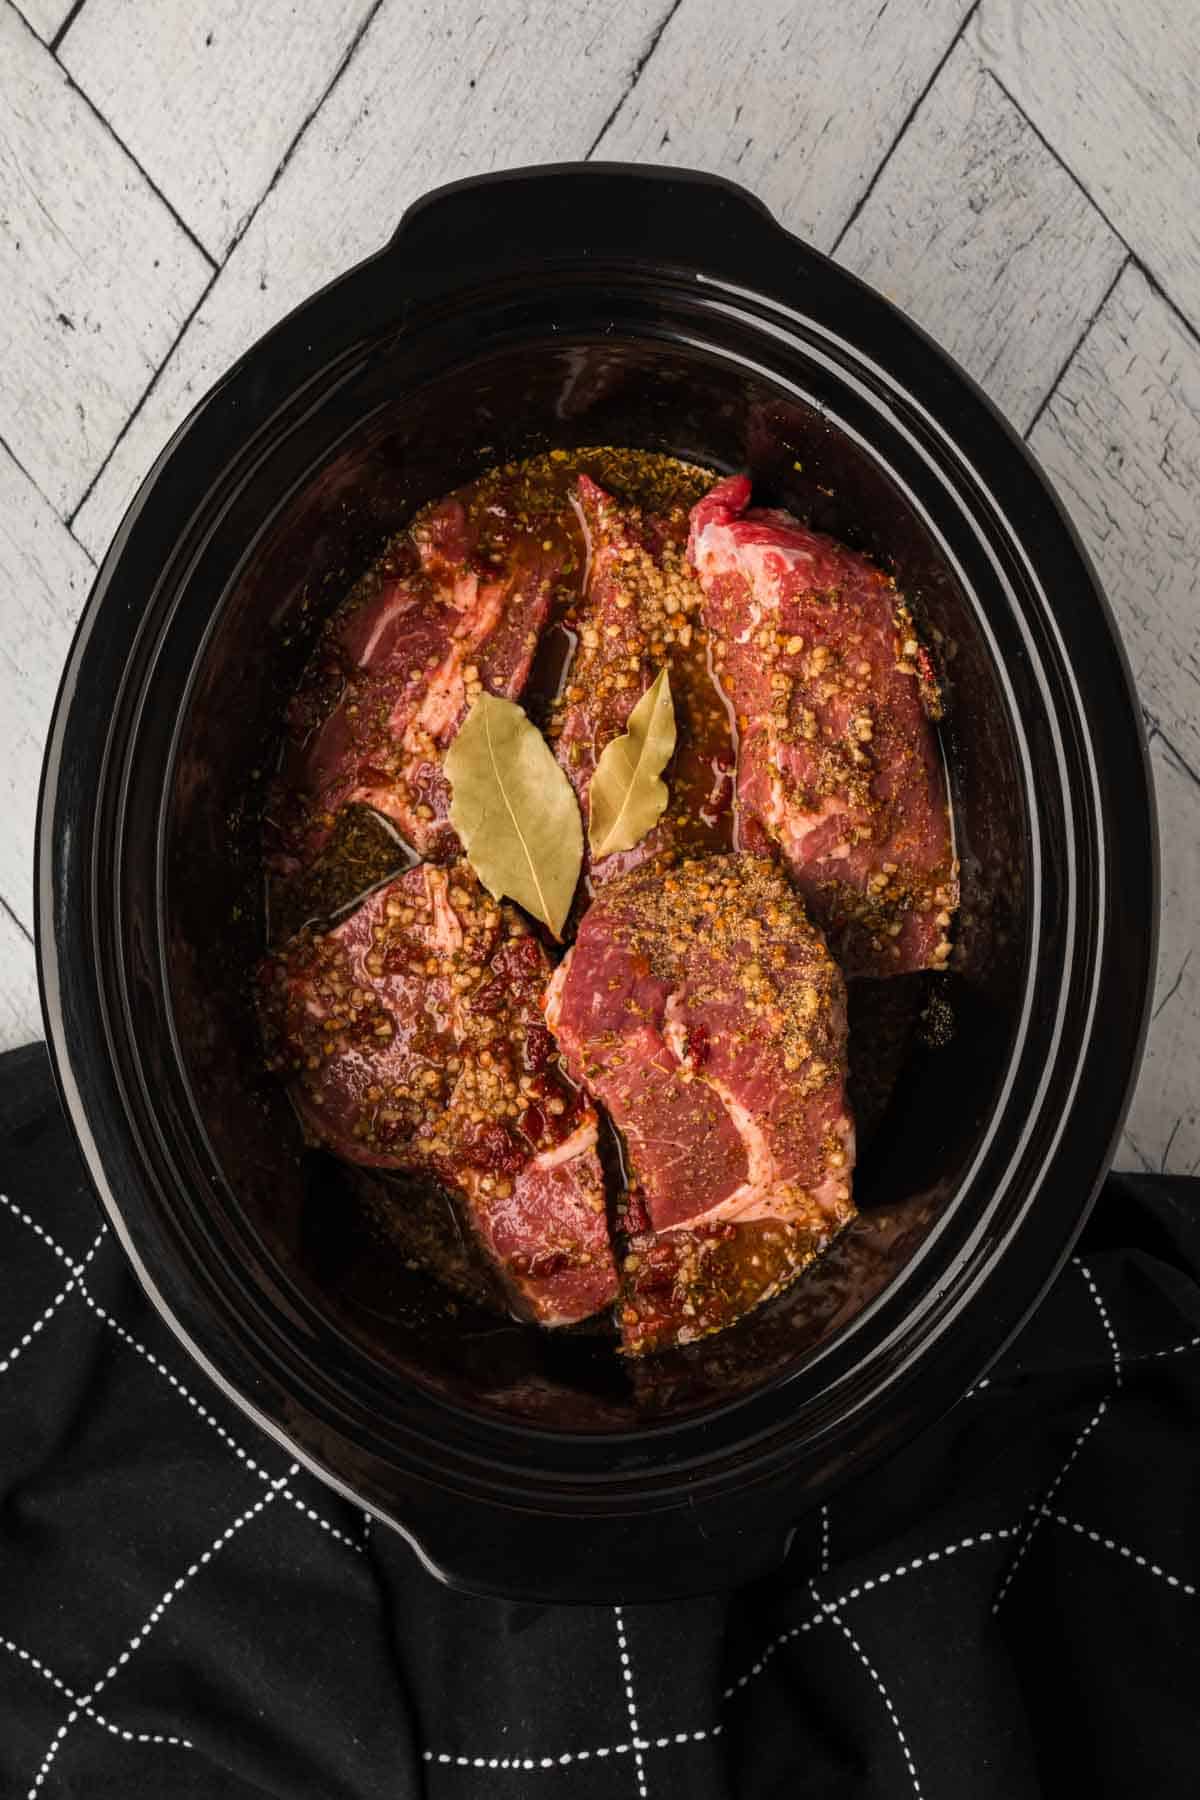 Topping the large beef roast pieces topped with seasoning in the slow cooker